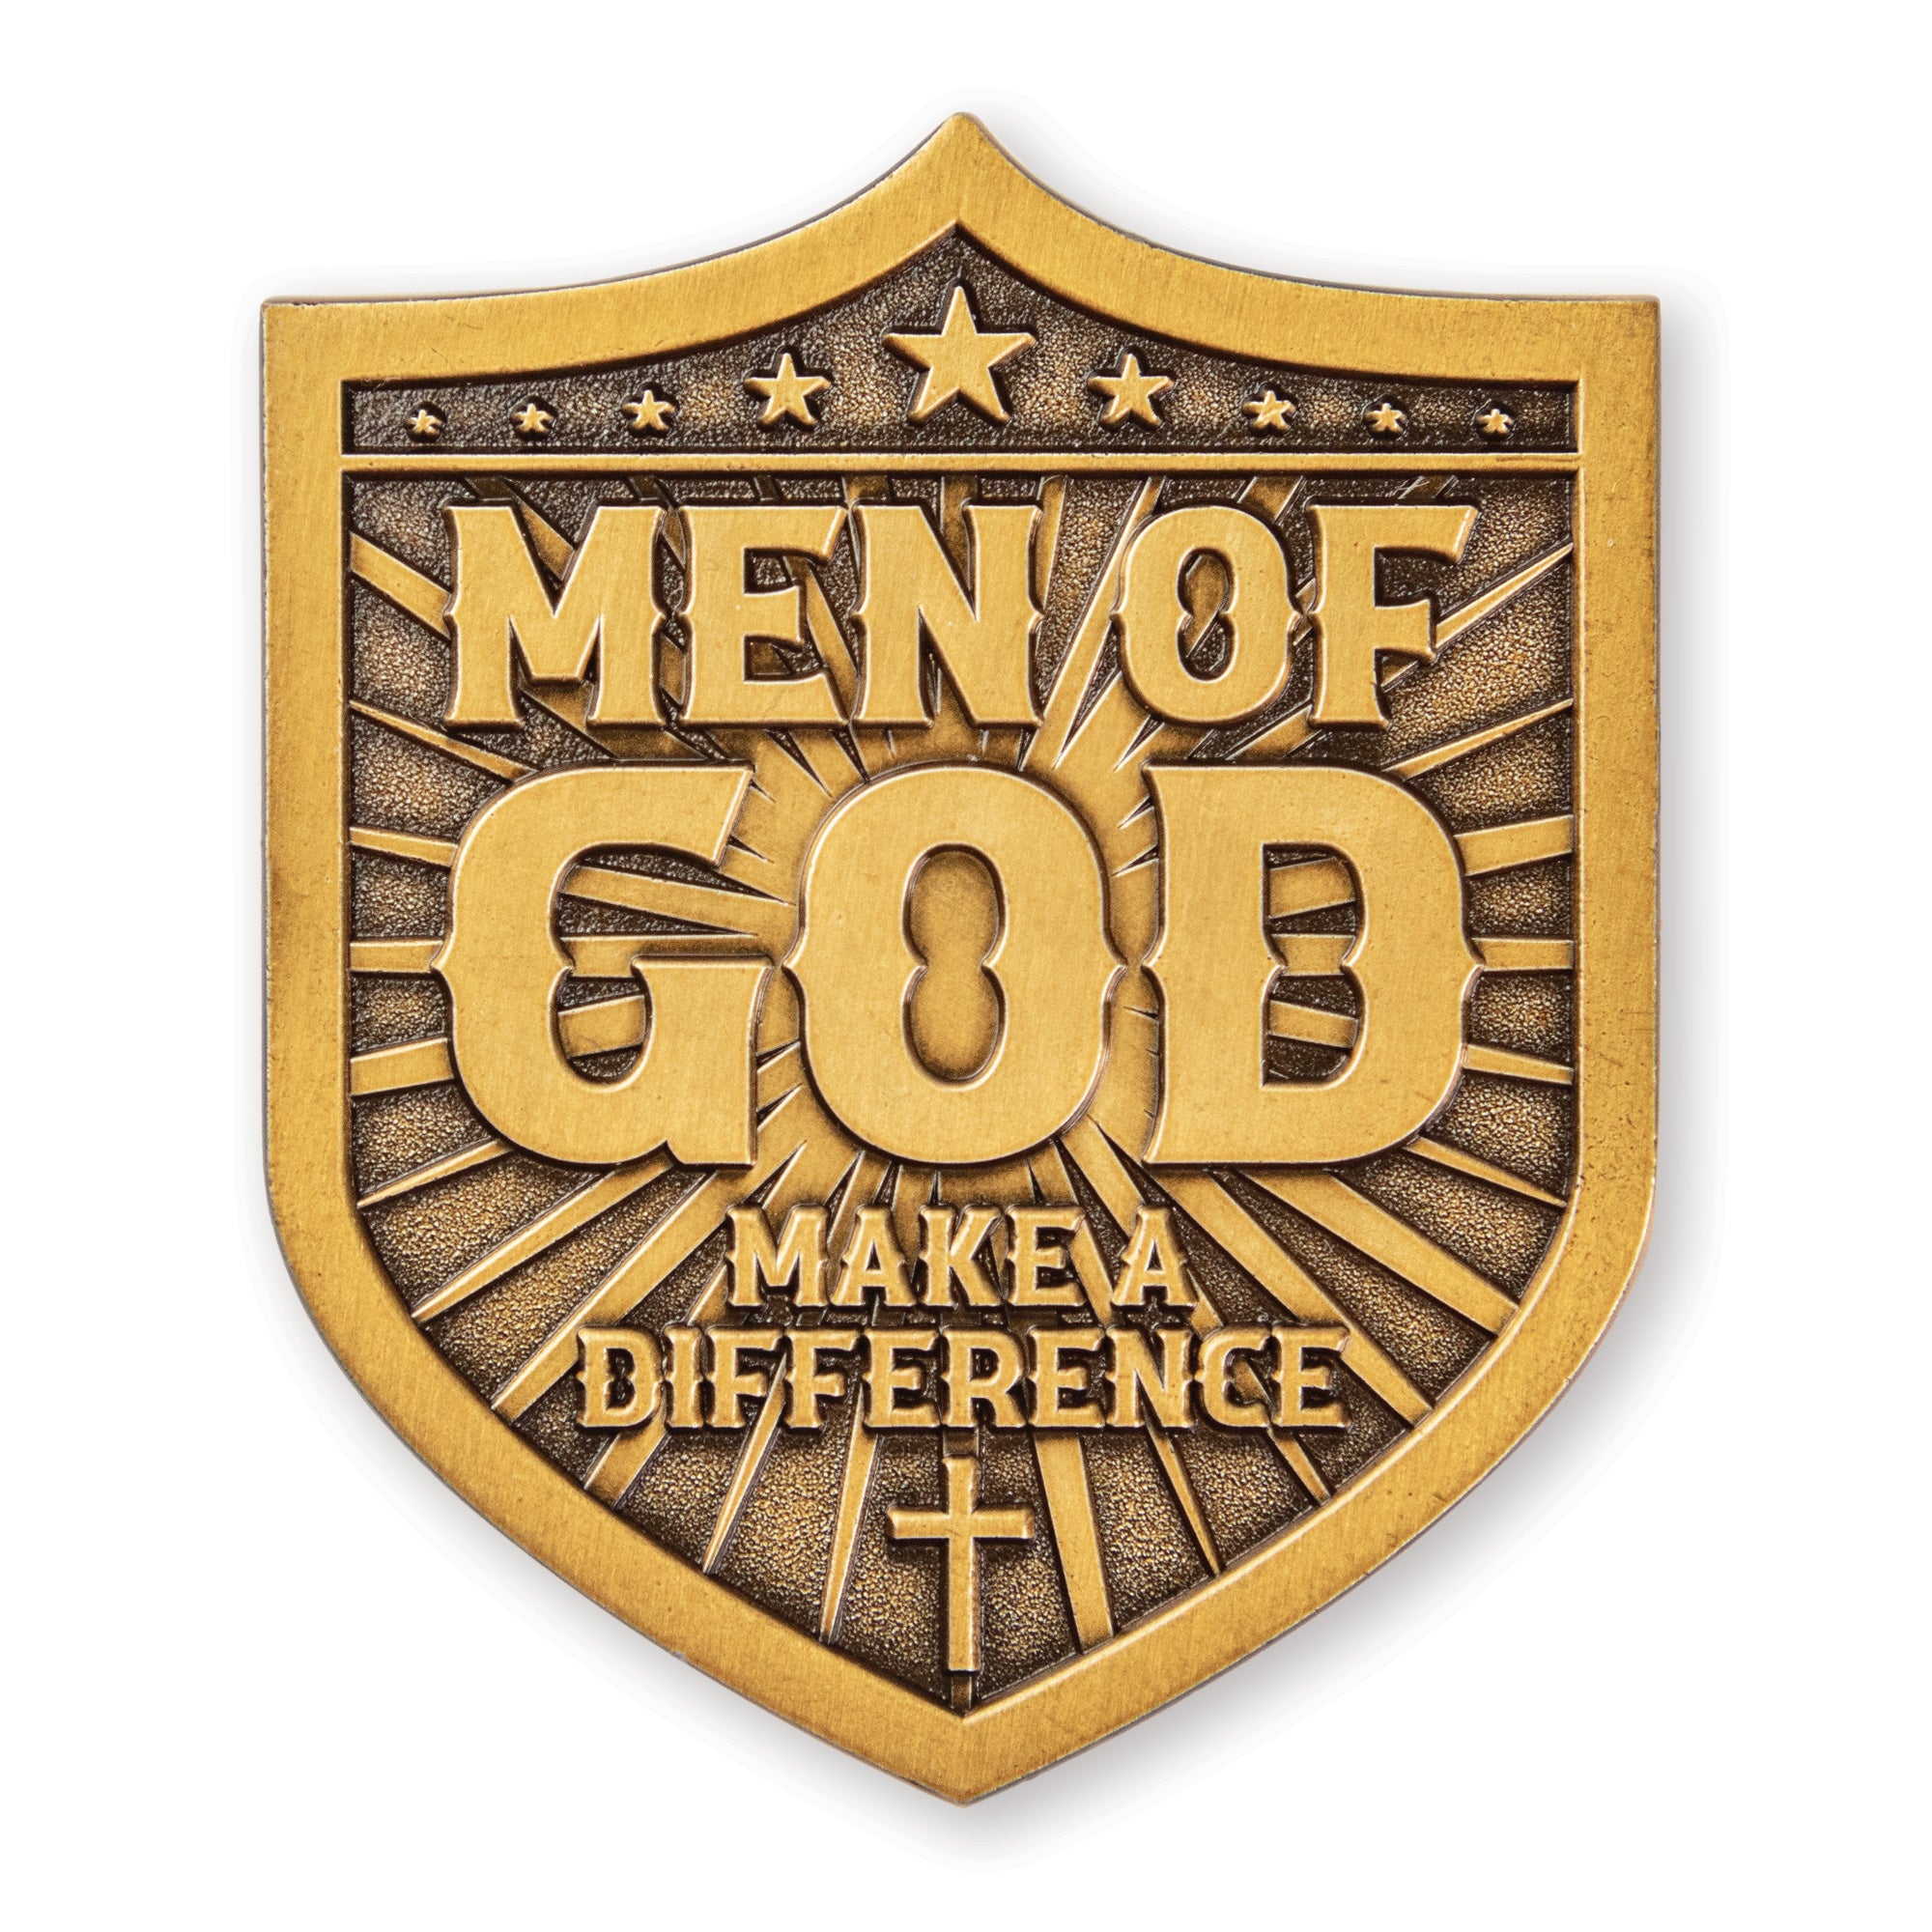 Make a Difference – Psalm 28:7 KJV Challenge Coin